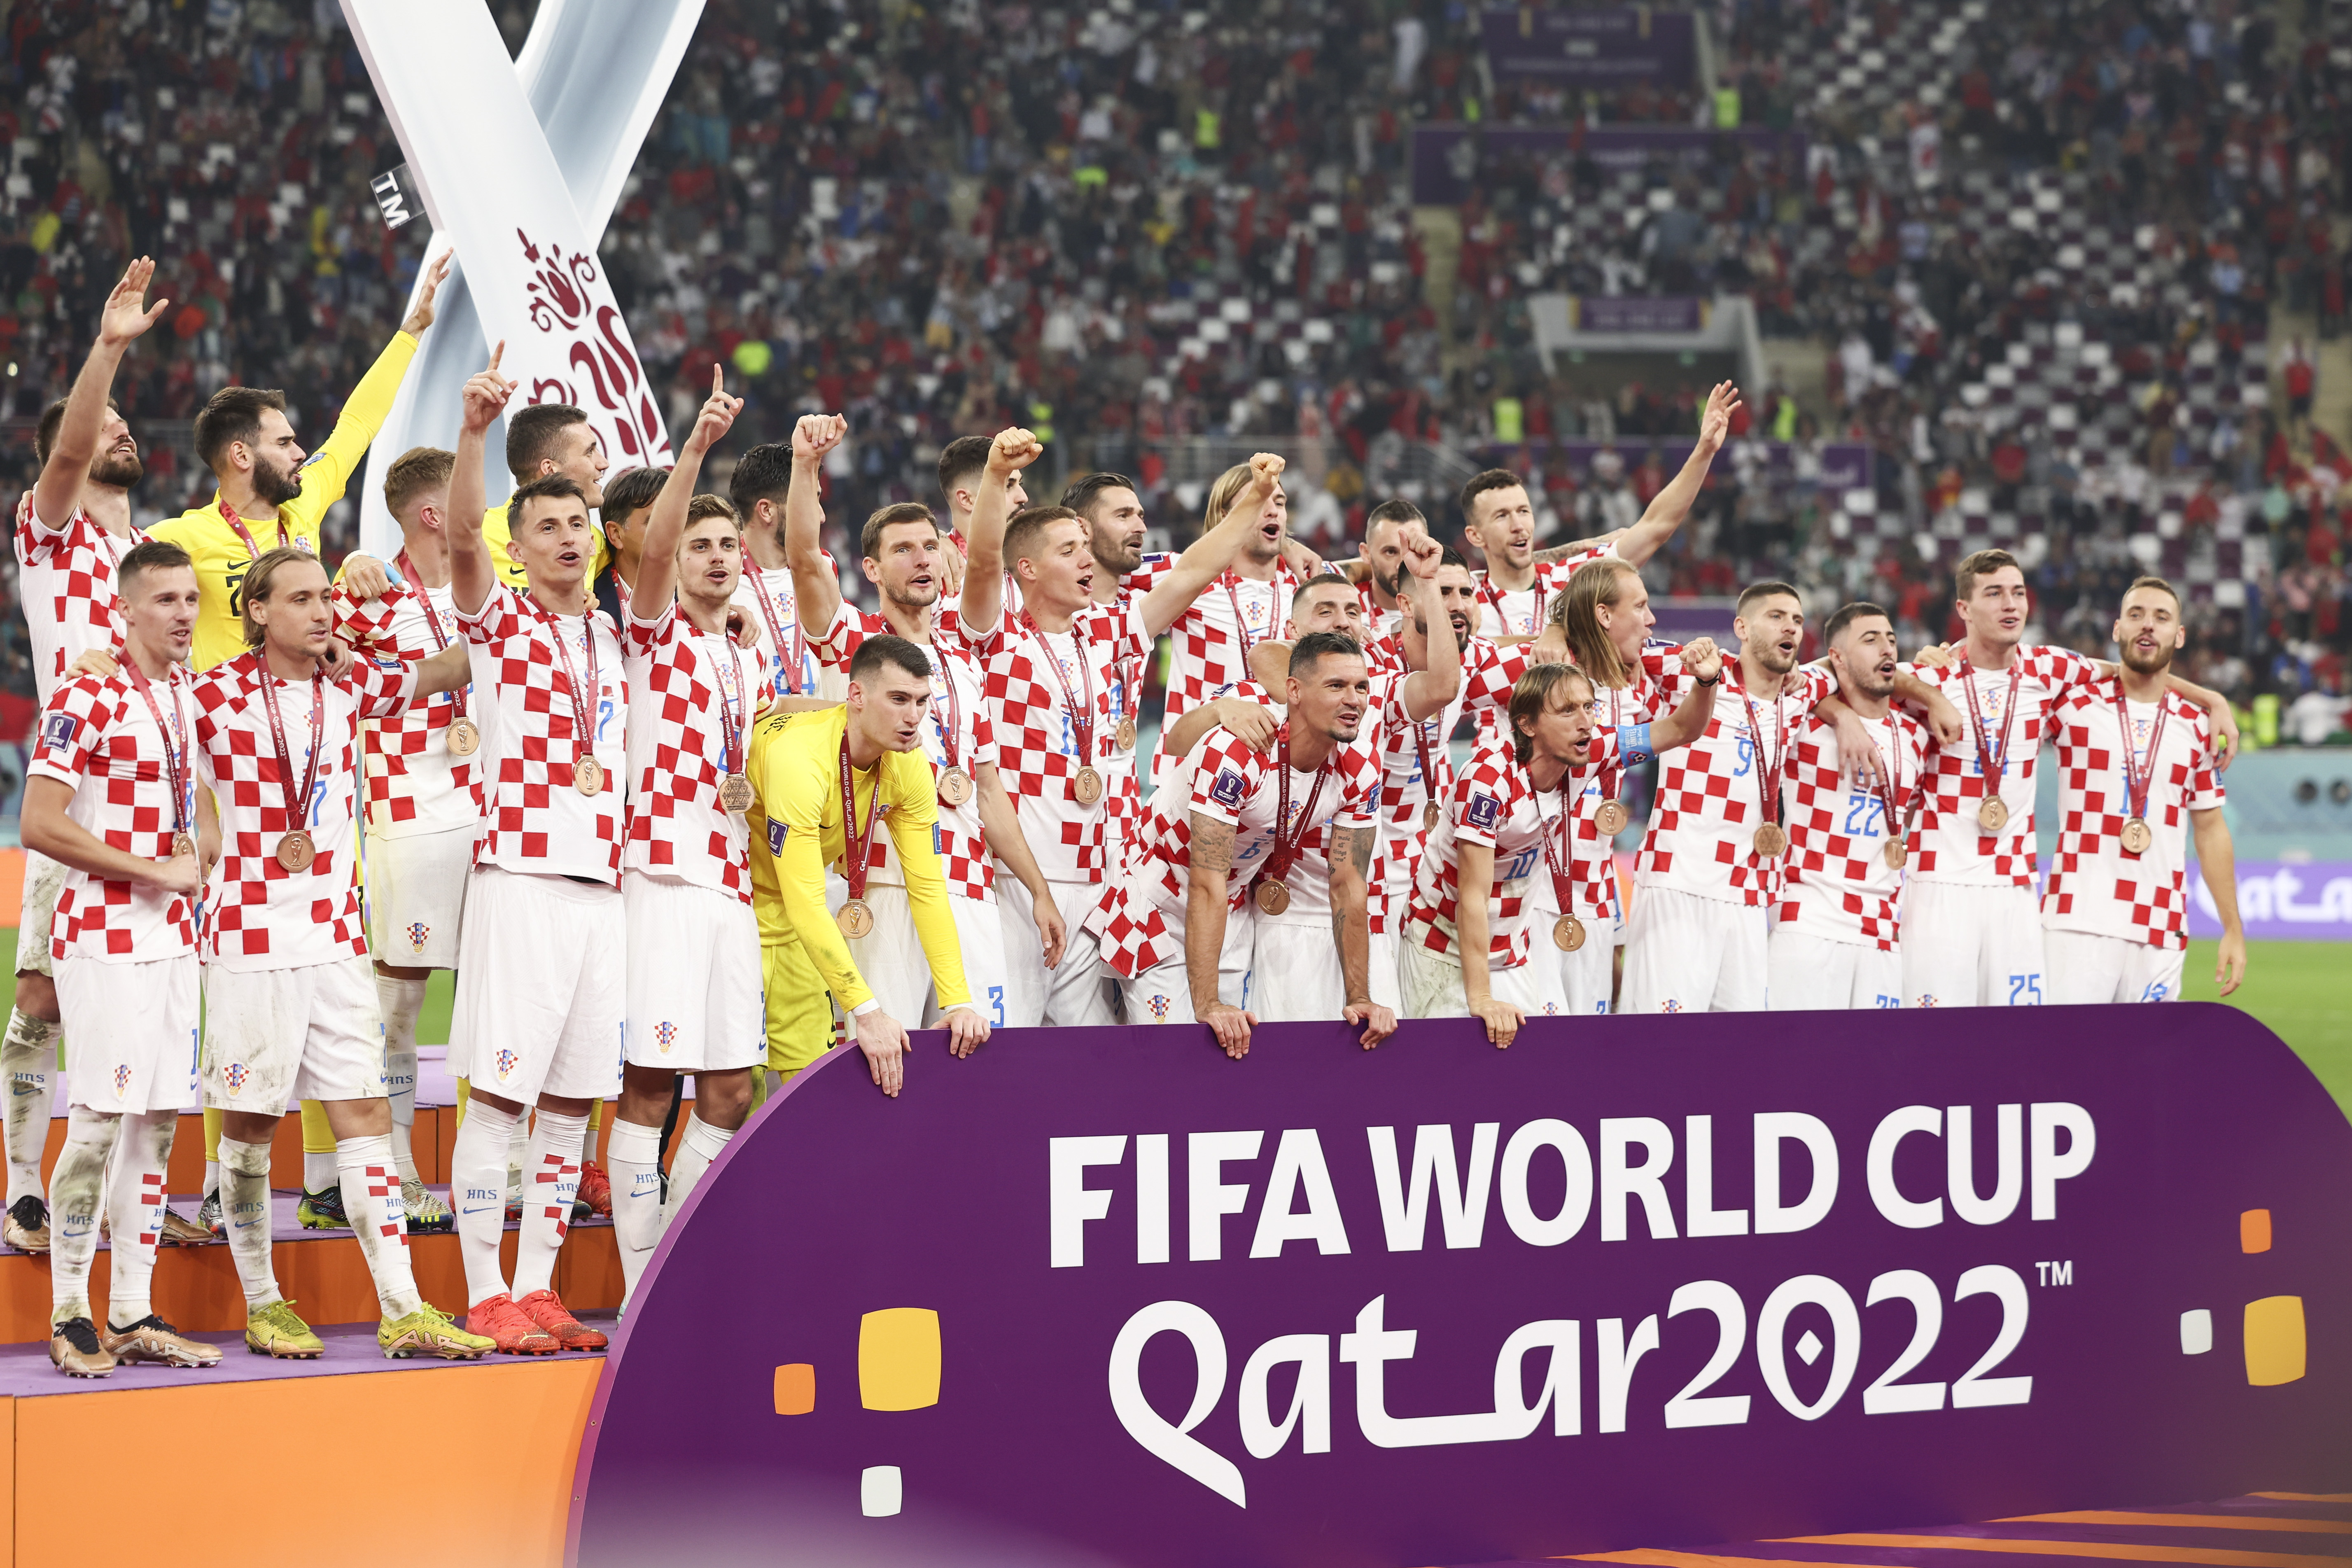 The Croatian national soccer team celebrates third place in the World Cup. 